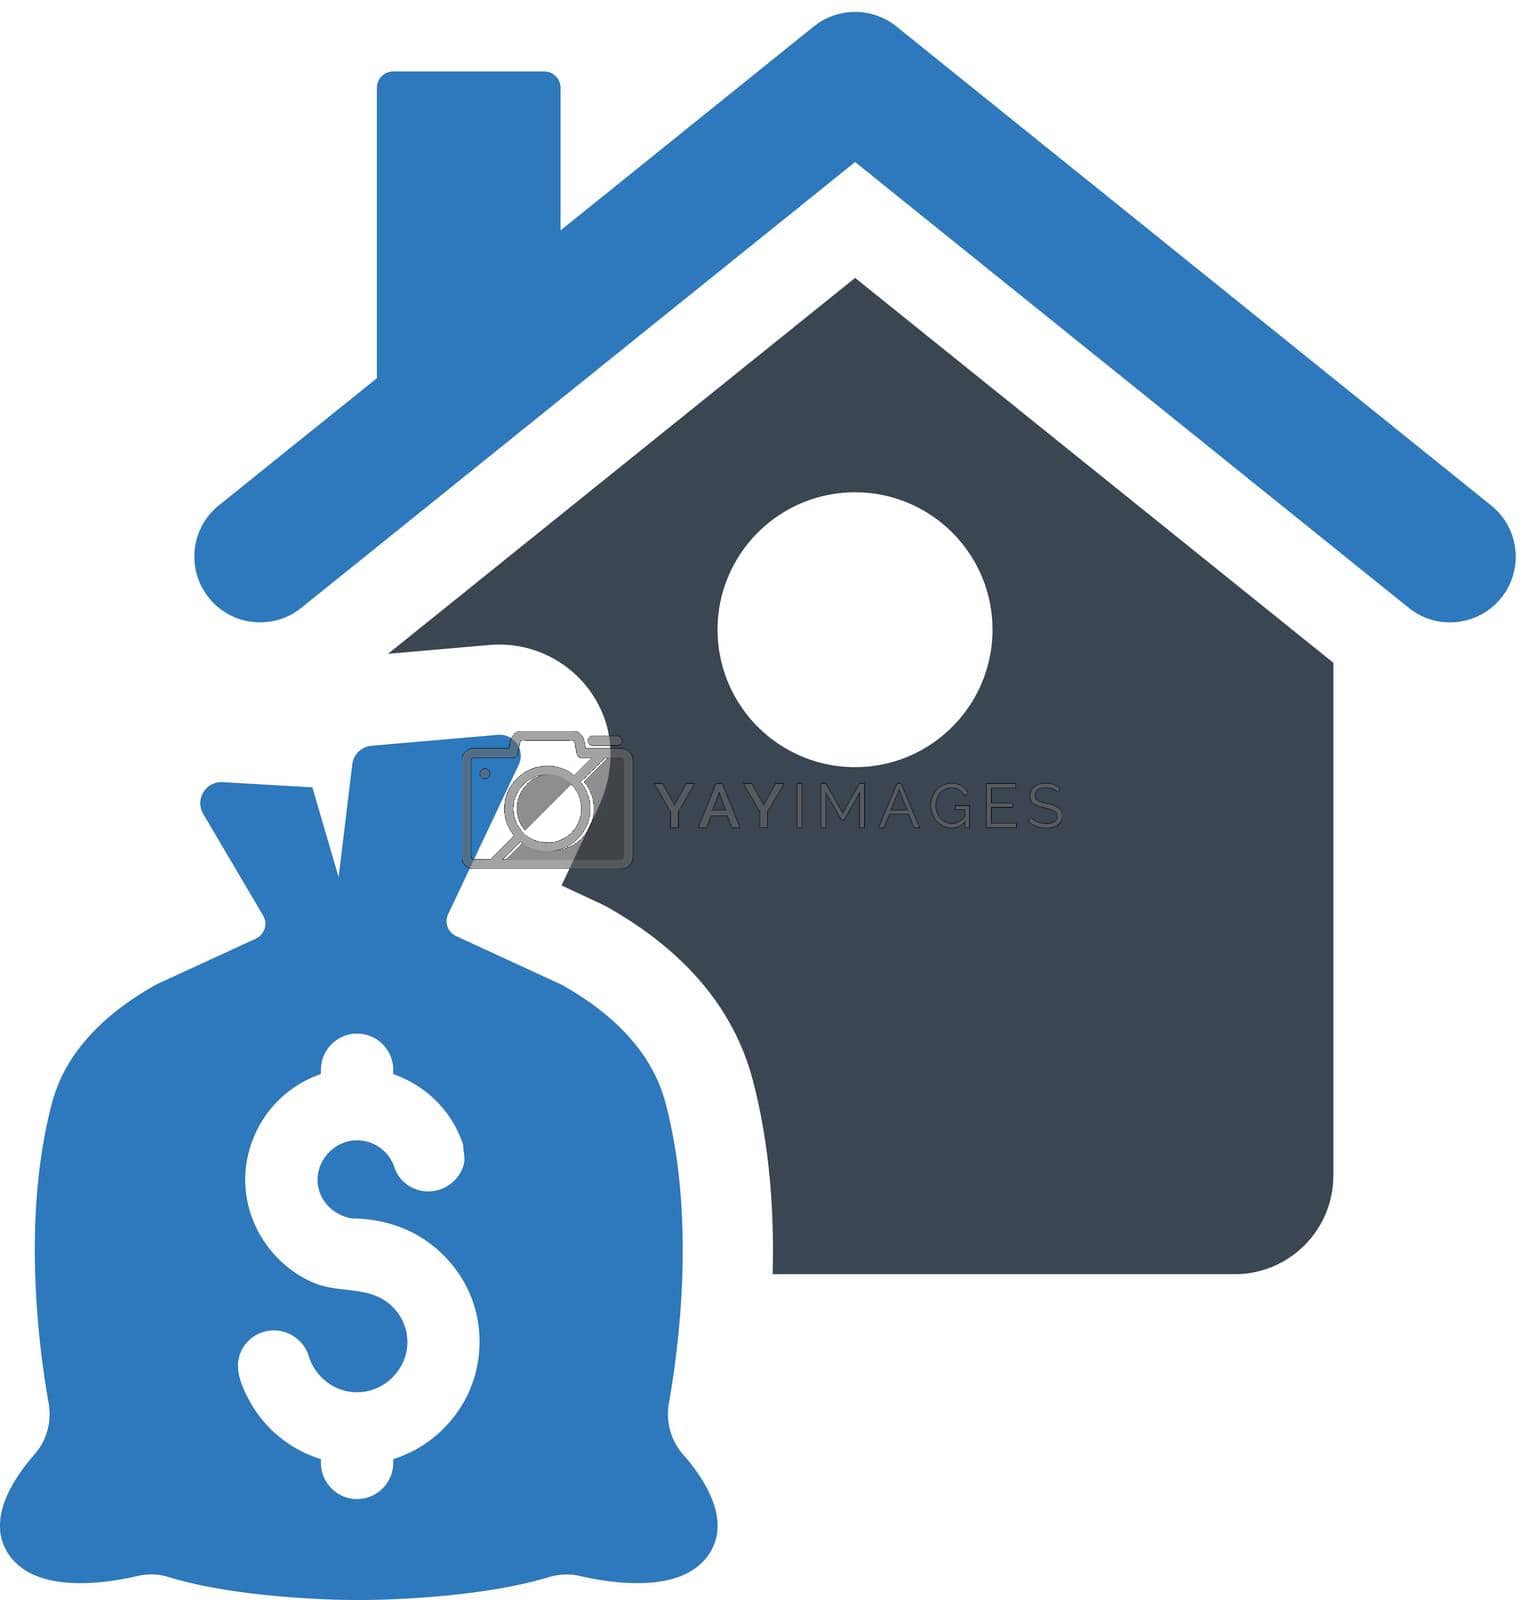 Royalty free image of Home finance icon by delwar018